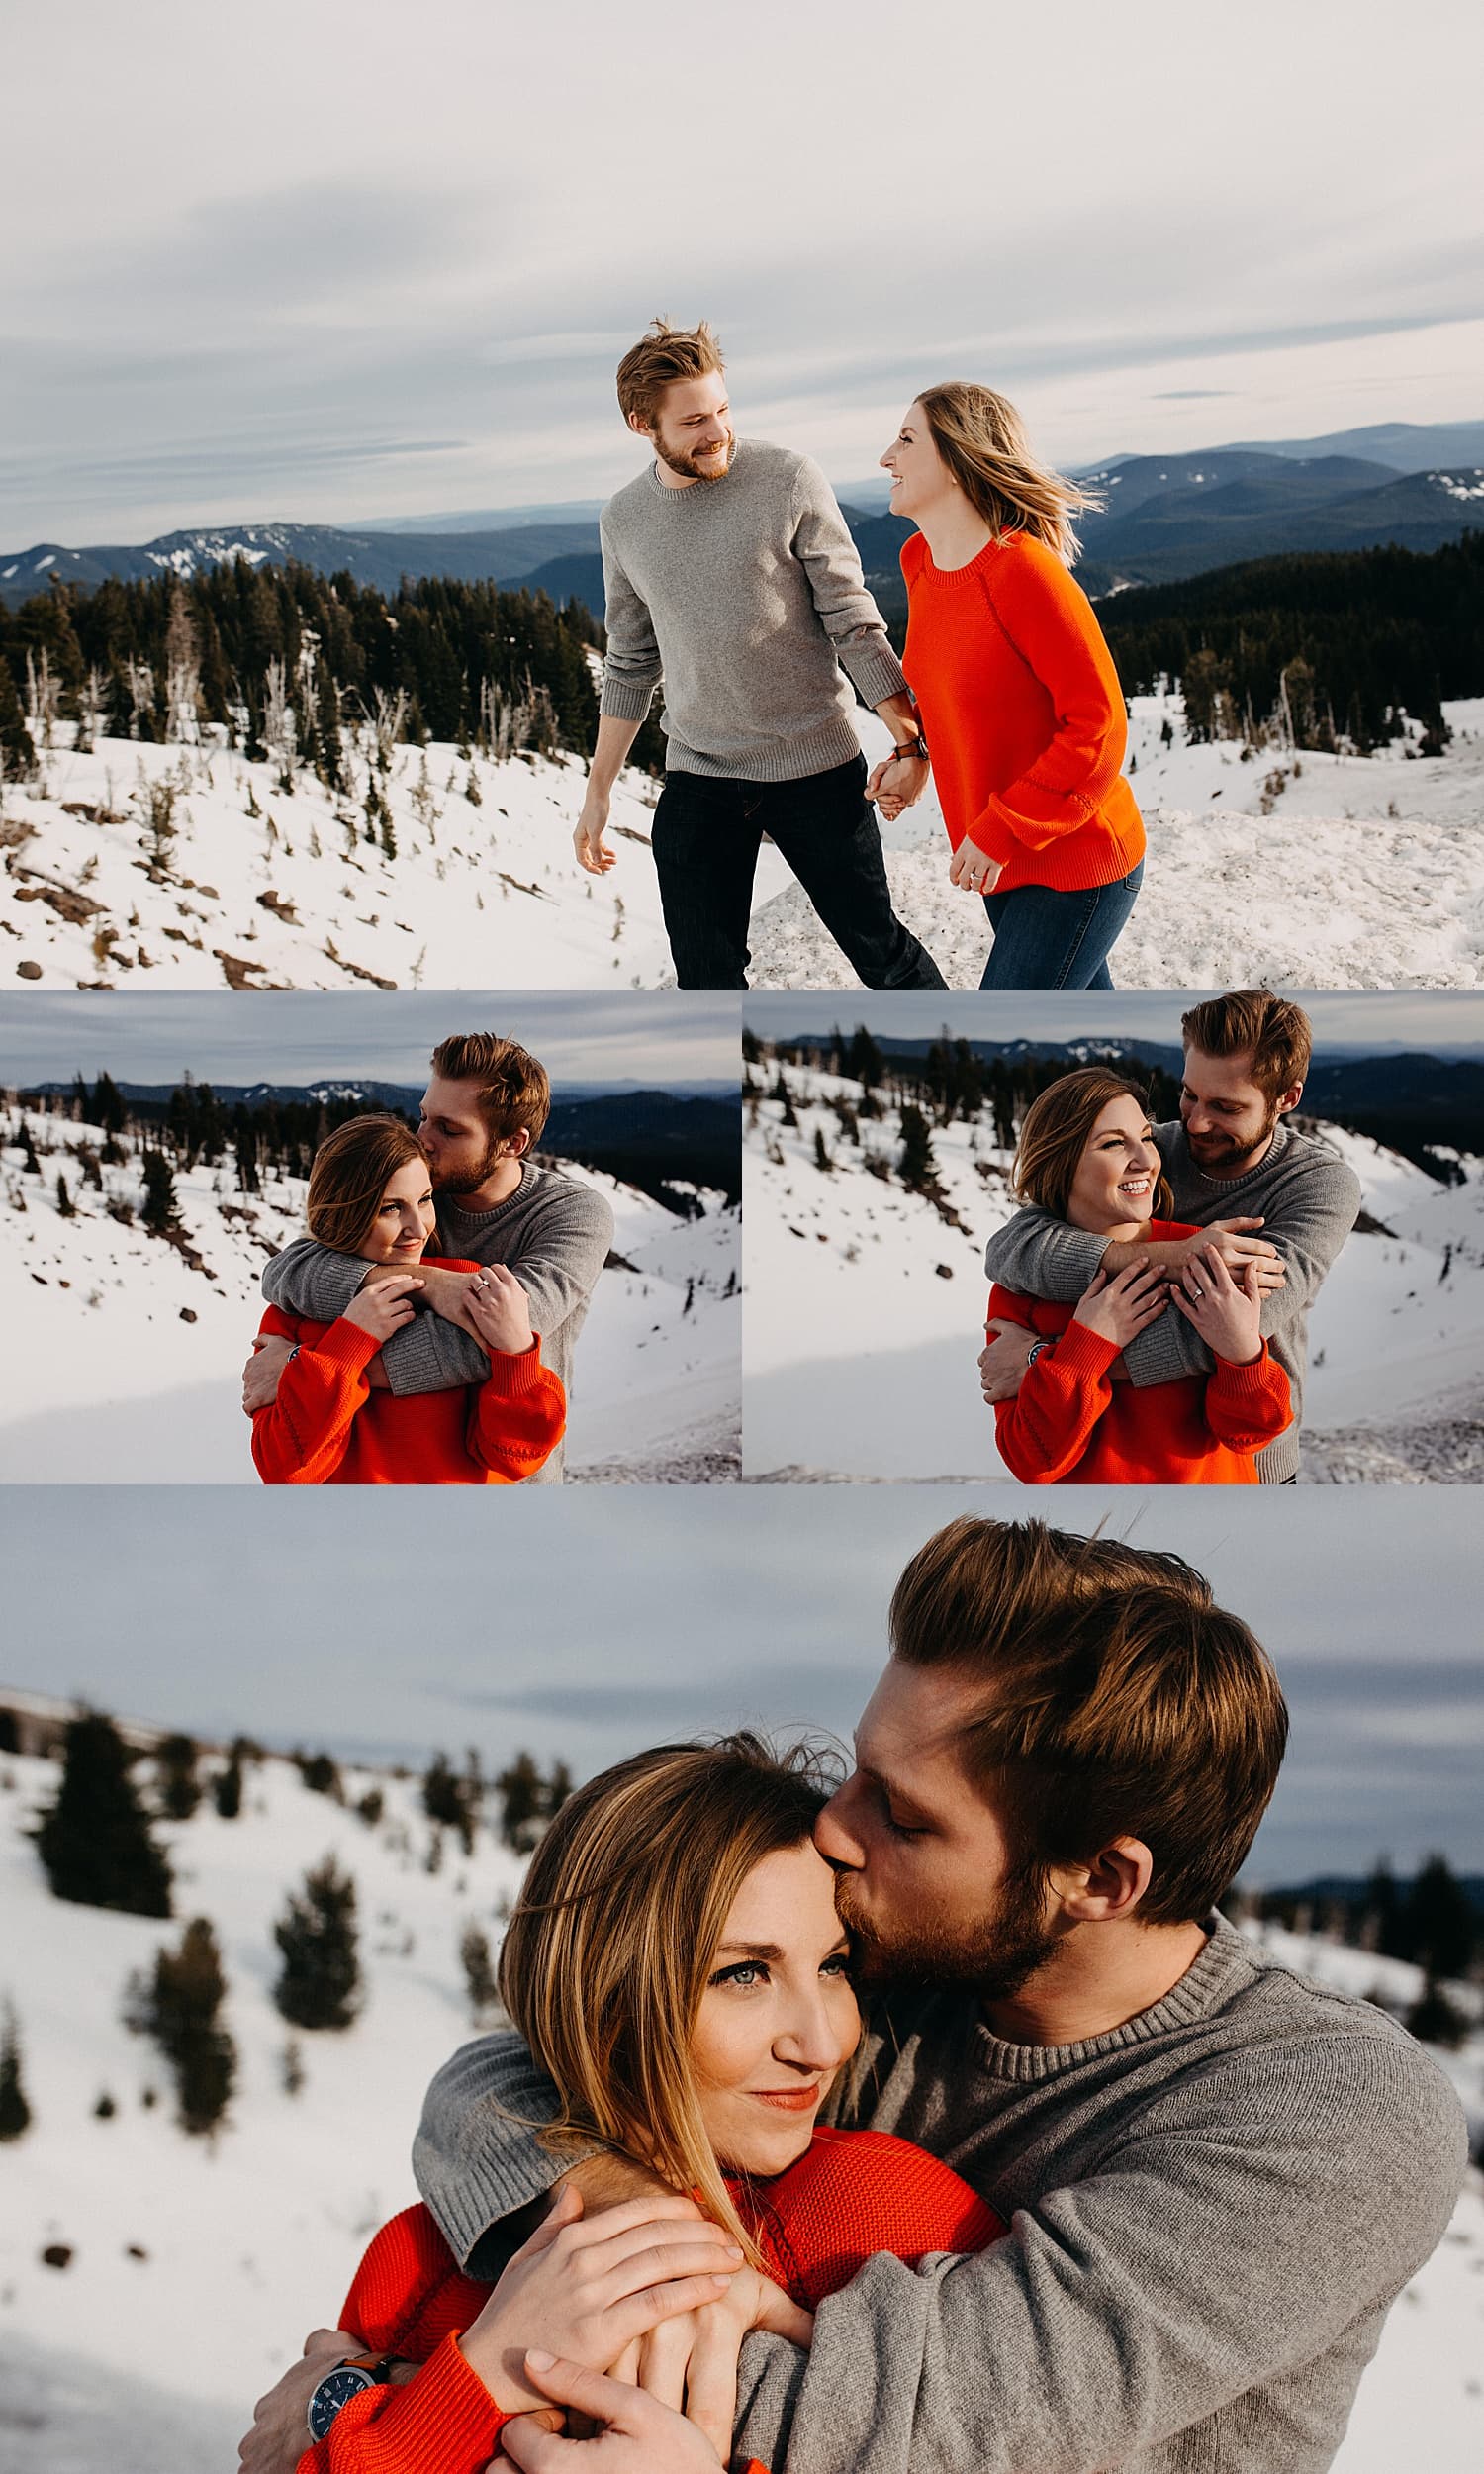 cute couple playing in the snow he's wearing a grew sweater and she's wearing an orange red sweater while he wraps his arms around her